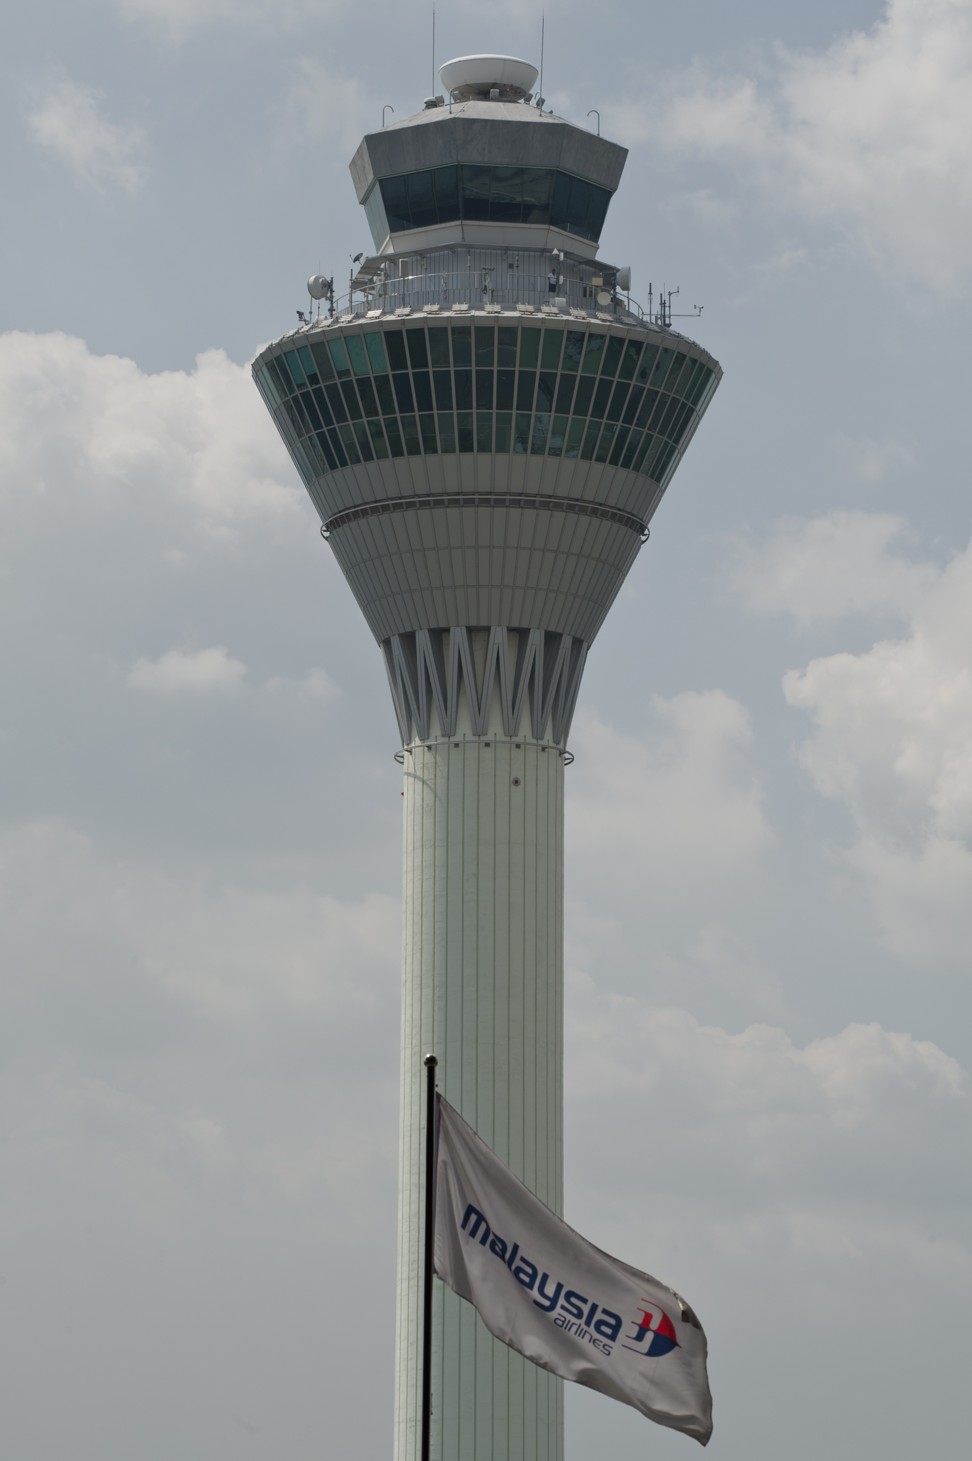 Malaysia’s Kuala Lumpur International Airport has the world’s tallest airport control tower. Photo: AFP